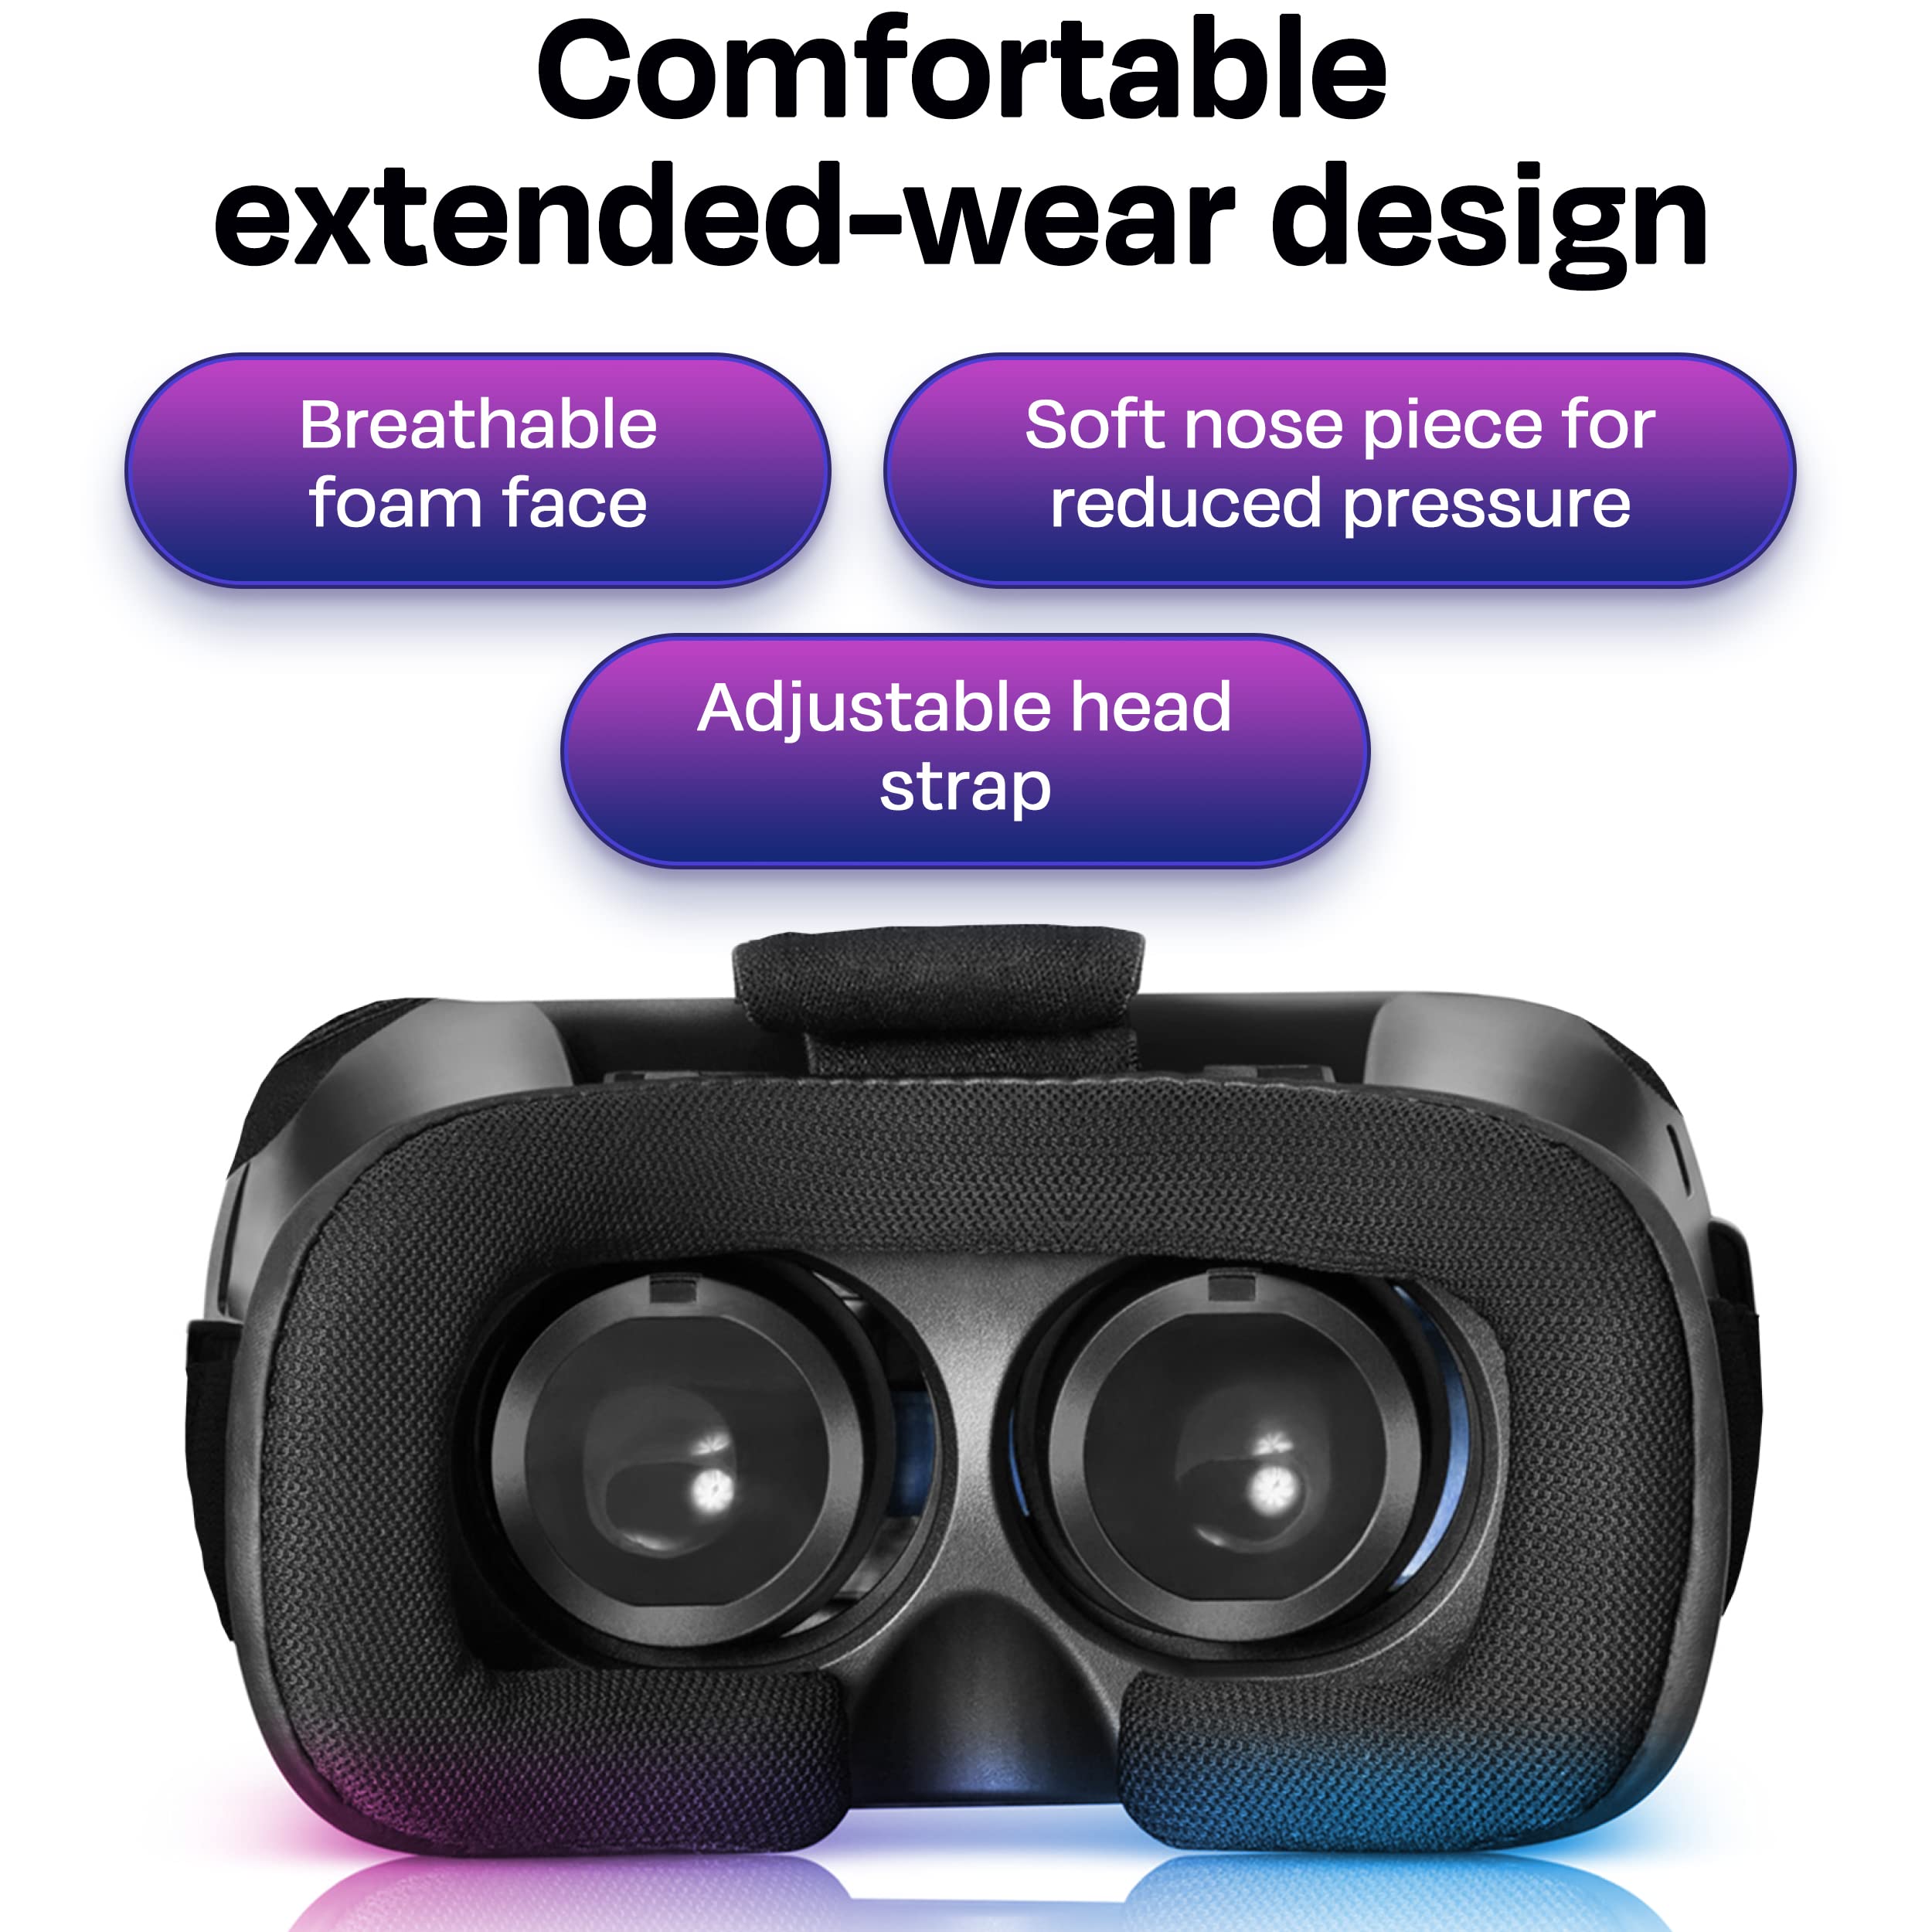 VR Headset with Controller Compatible with iPhone & Android Phone - Universal Virtual Reality Goggles - Soft & Comfortable New 3D VR Glasses (Blue w/Controller)  - Very Good